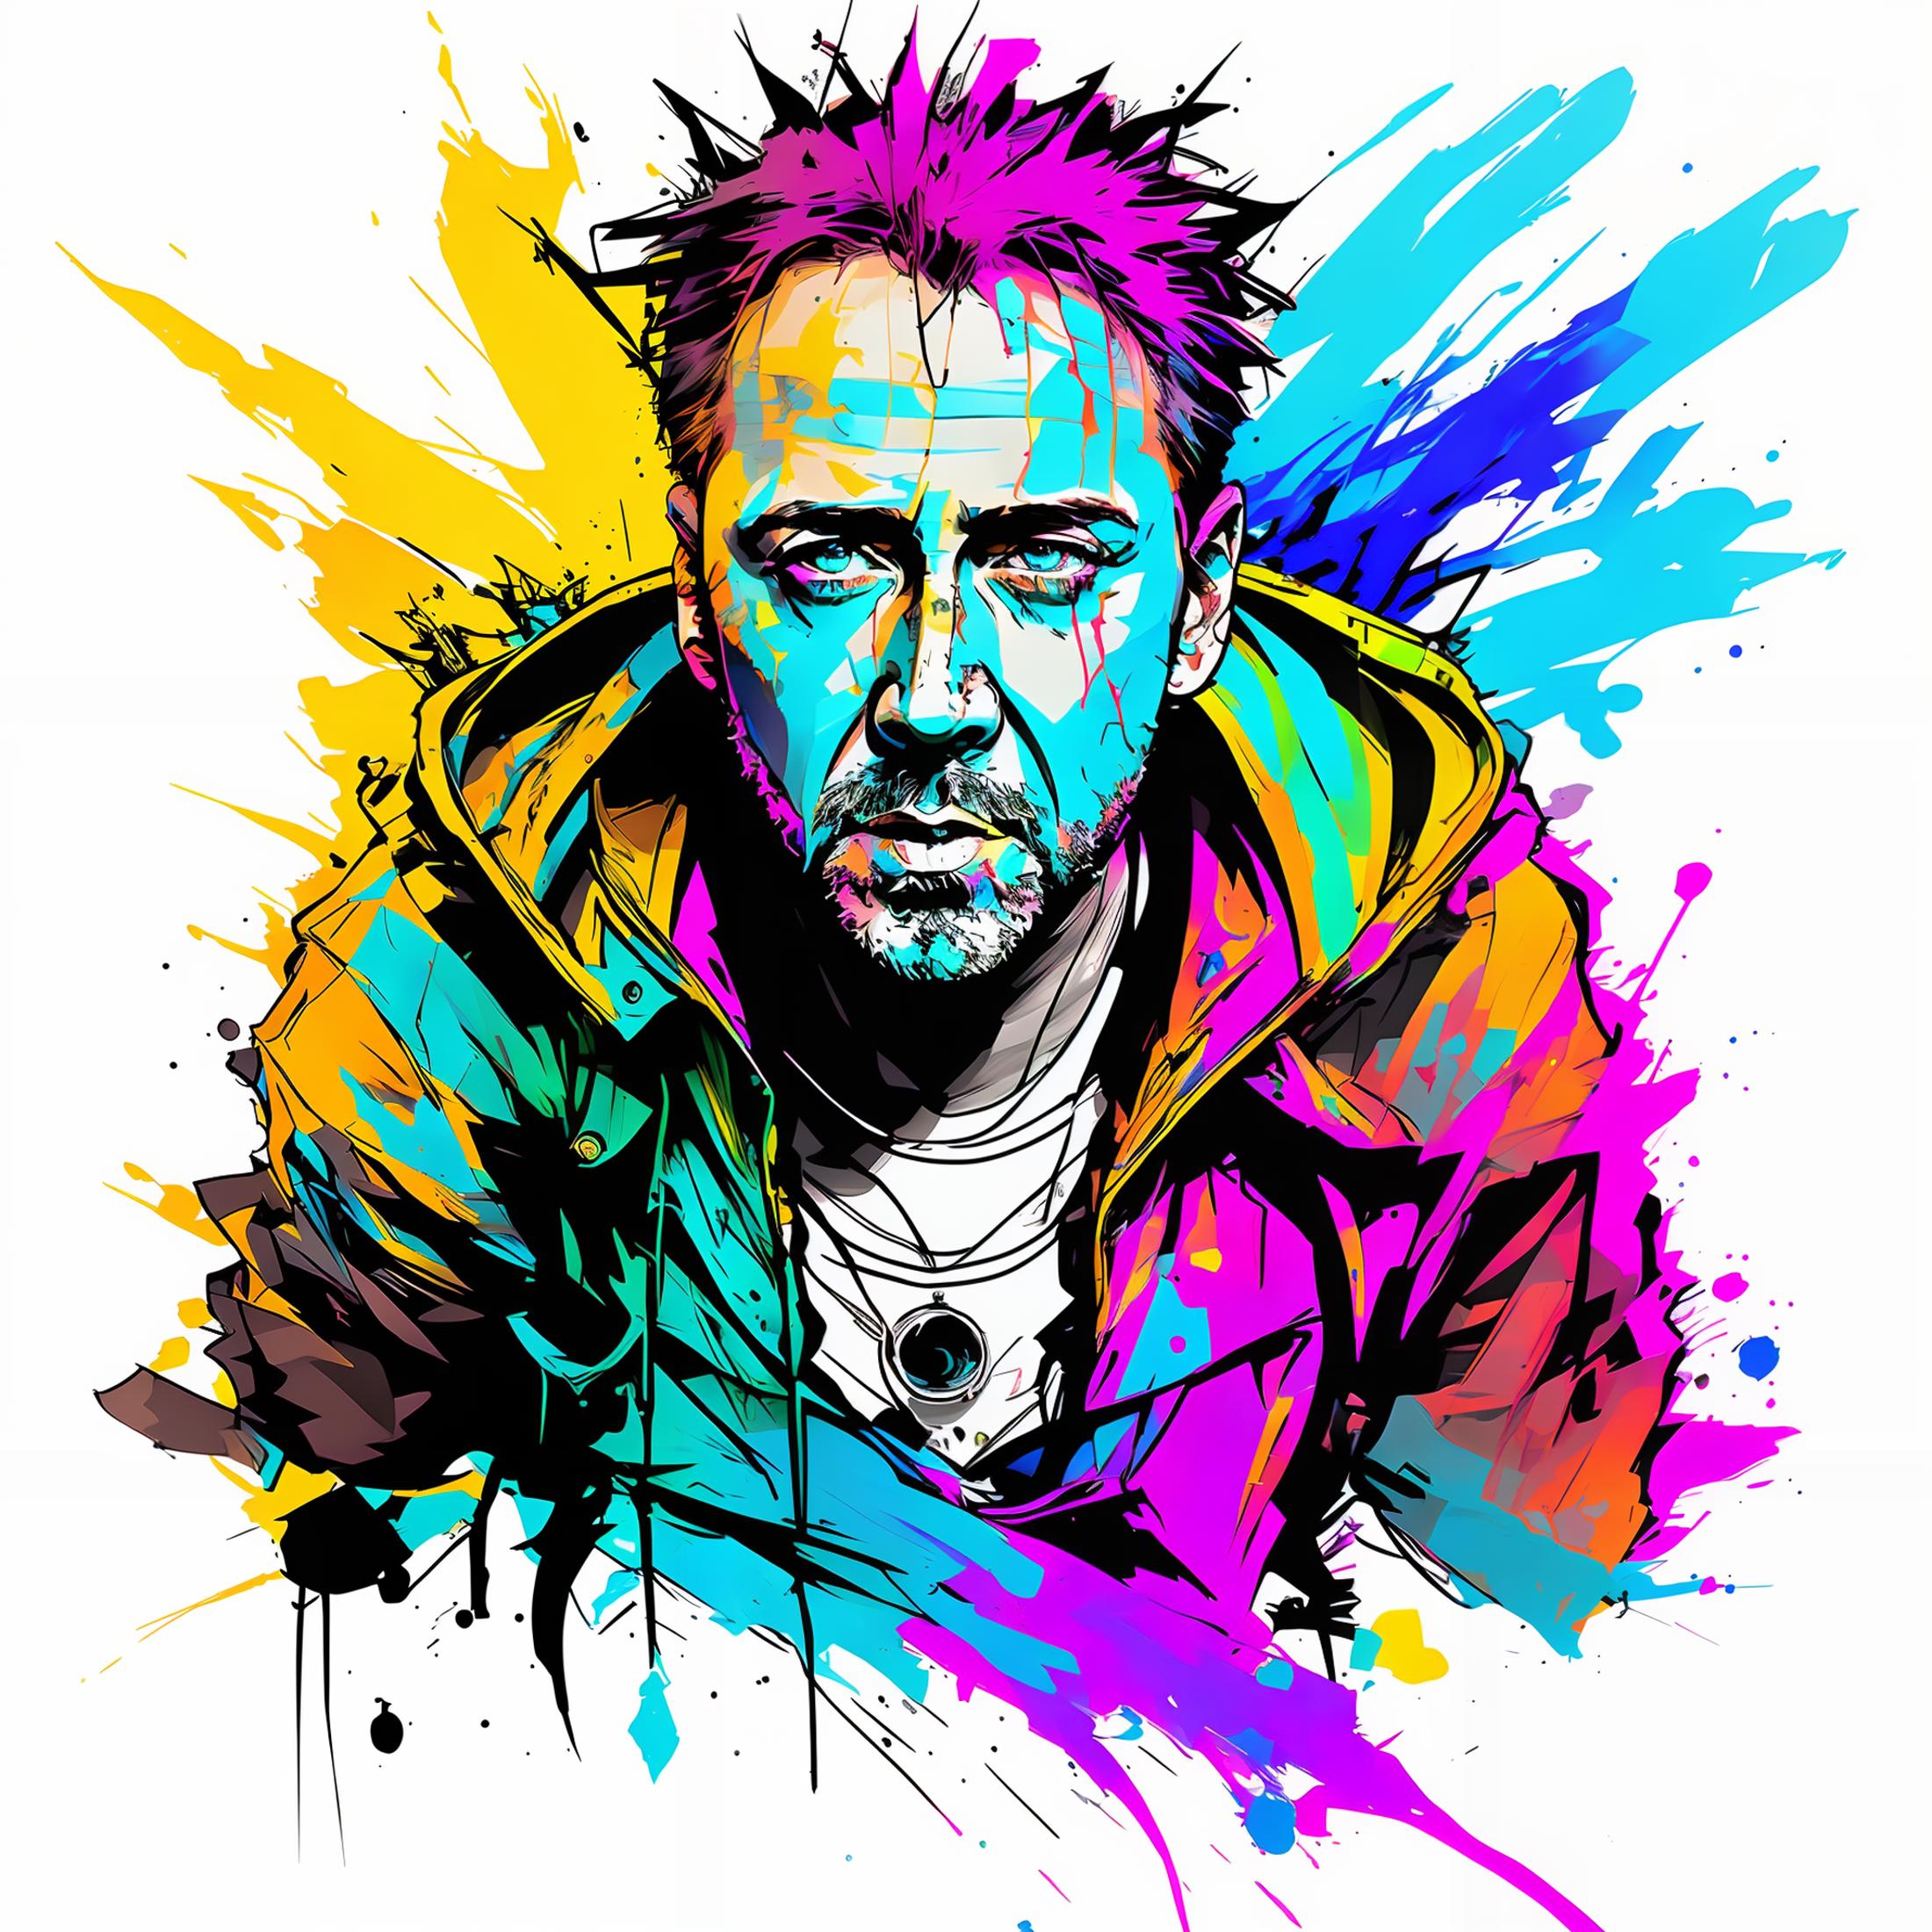 The image features a man with a colorful background, possibly a painting or a colorful splash. He is wearing a hooded jacket and has a beard. The man's expression appears to be angry or serious, as he stares straight ahead. The colorful background adds a vibrant and artistic touch to the scene.